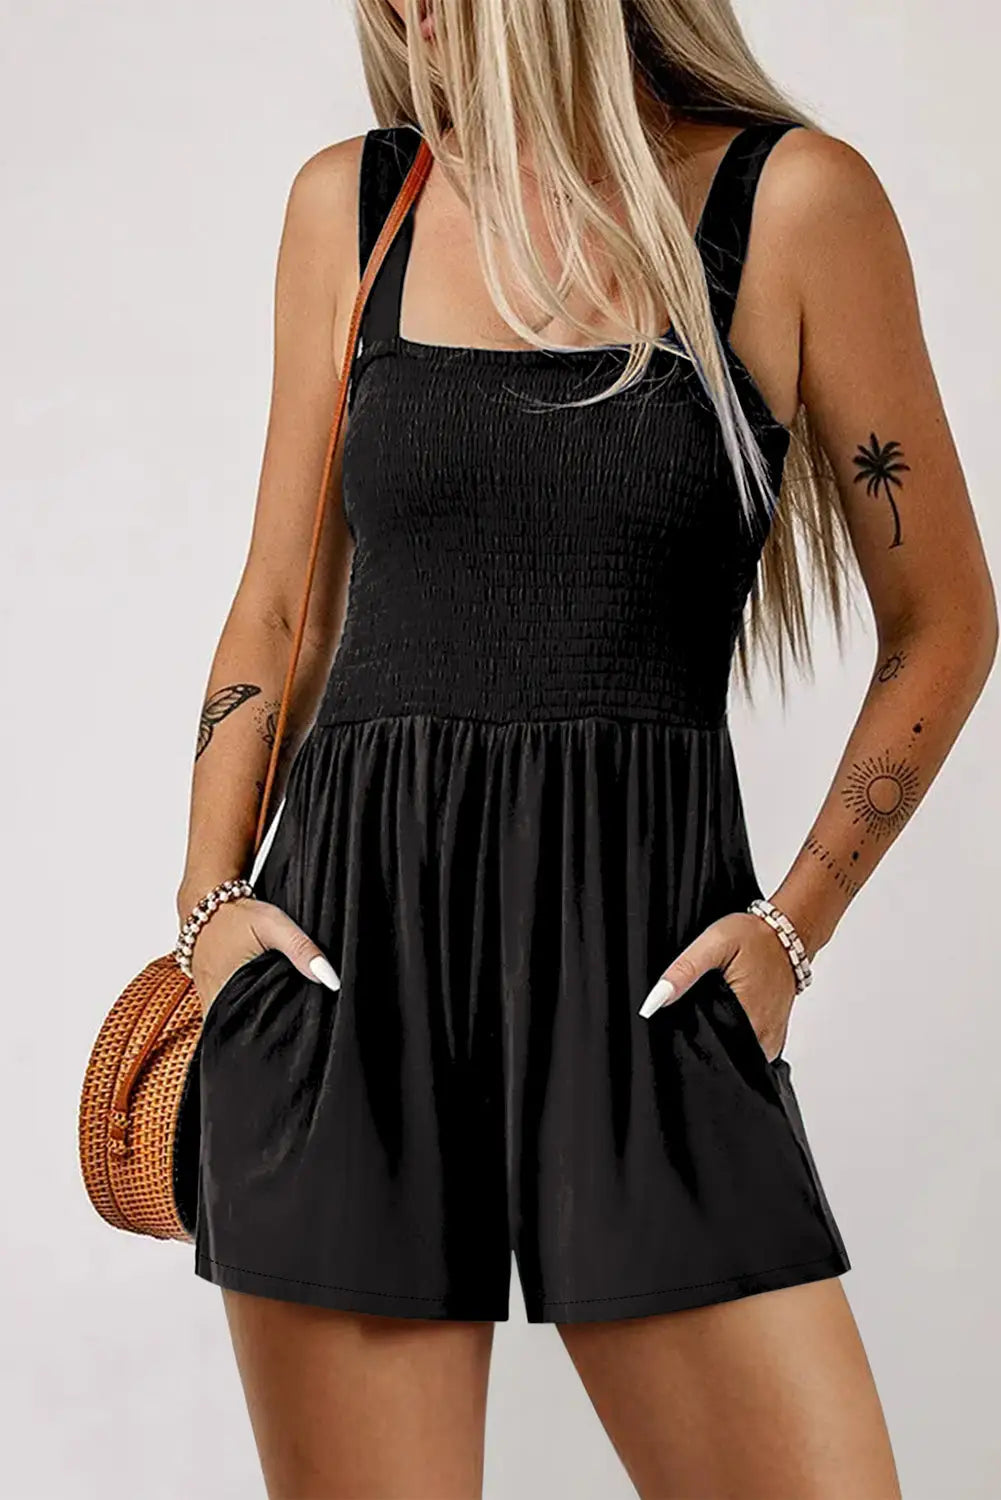 Black casual smocked sleeveless romper - s / 100% polyester - rompers